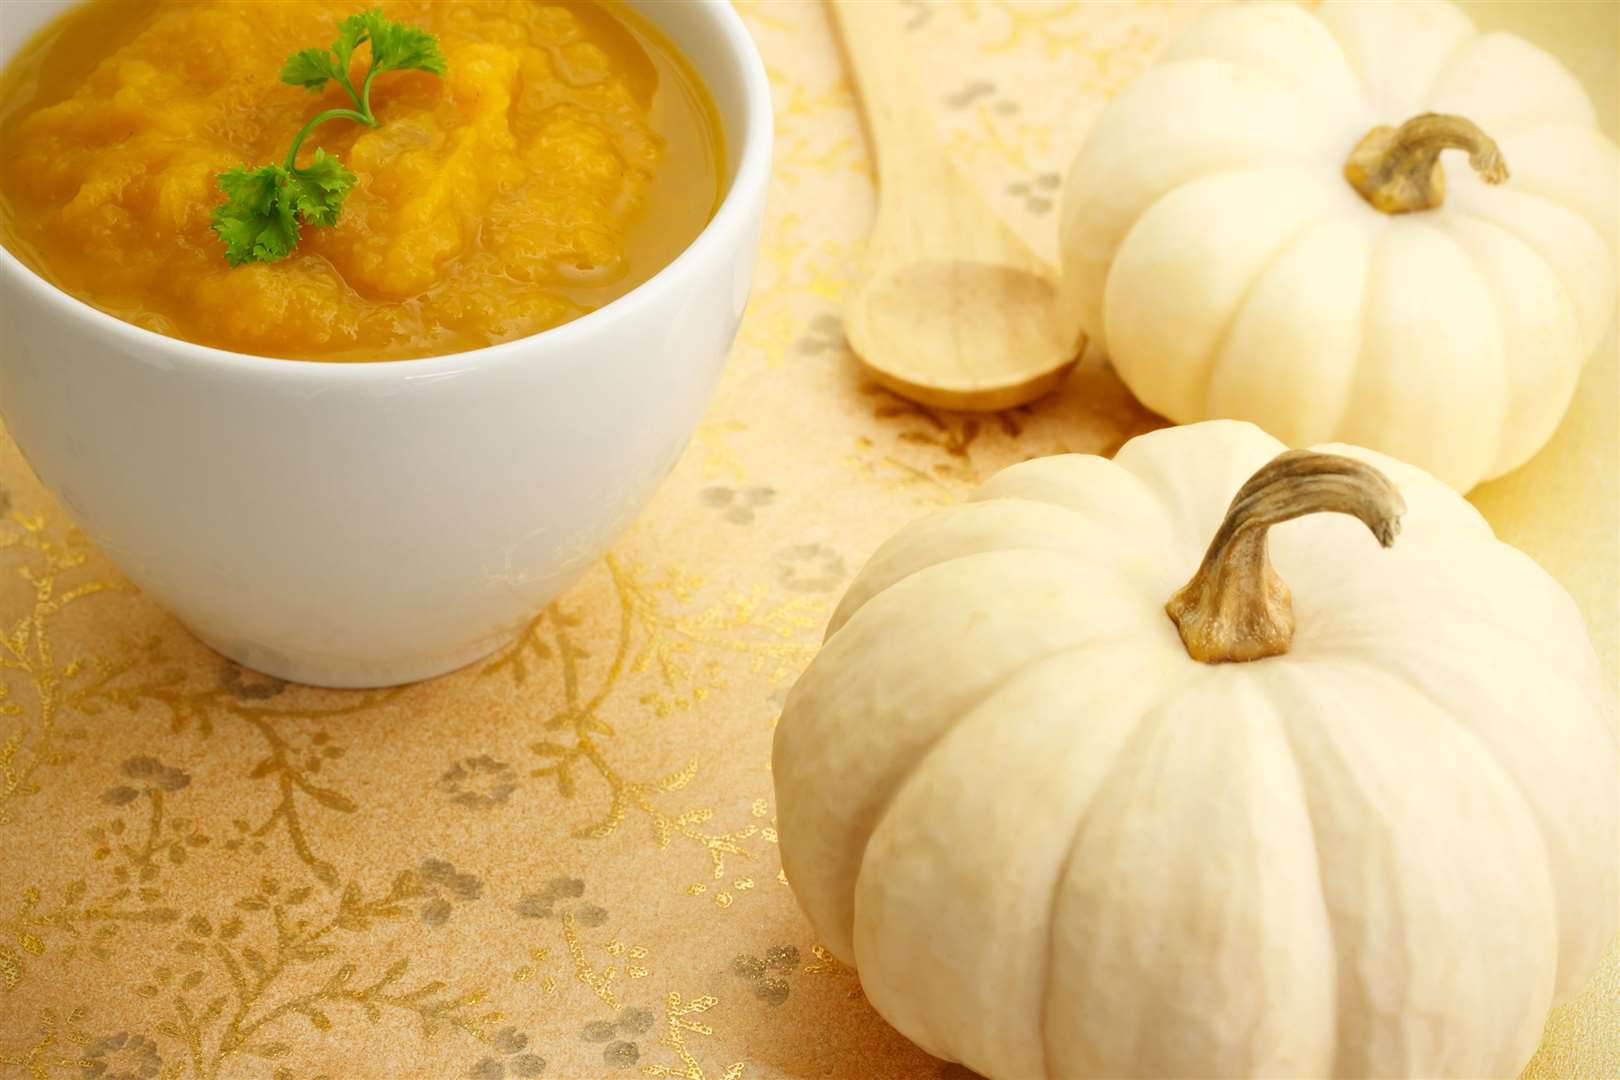 Pumpkin soup is a good way to use up the leftovers from carving.